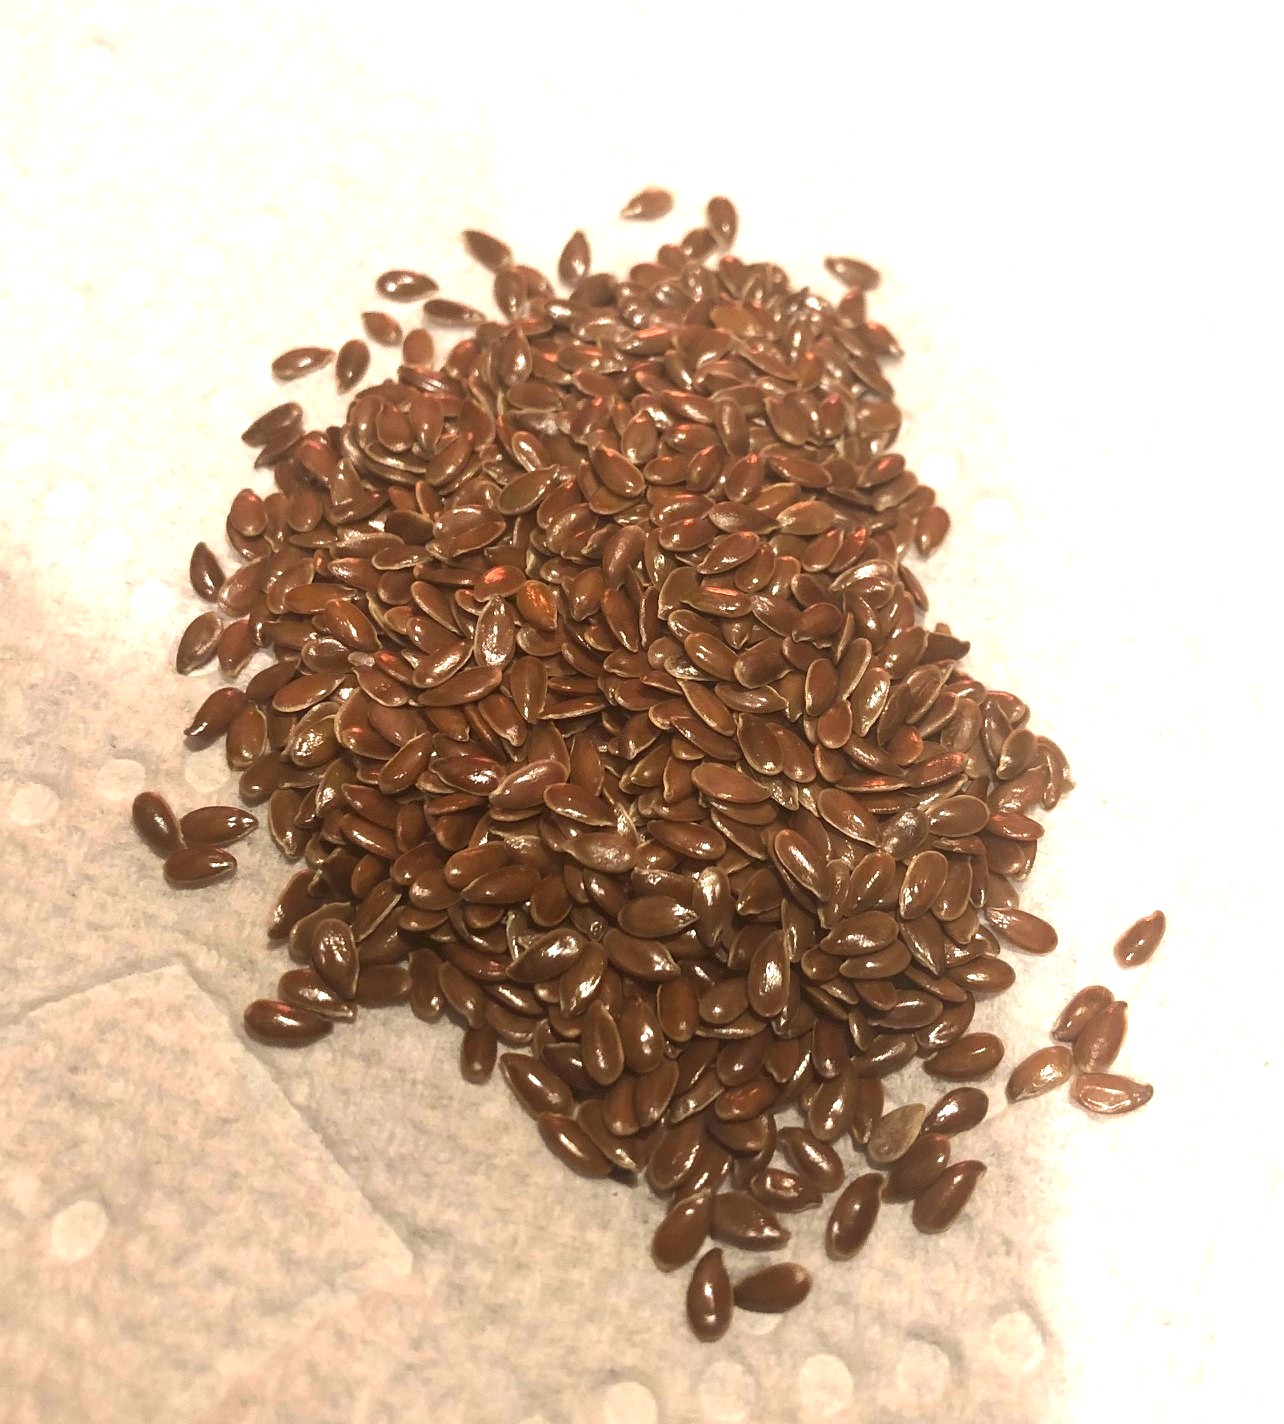 Organic Brown Flax Seeds on White Background